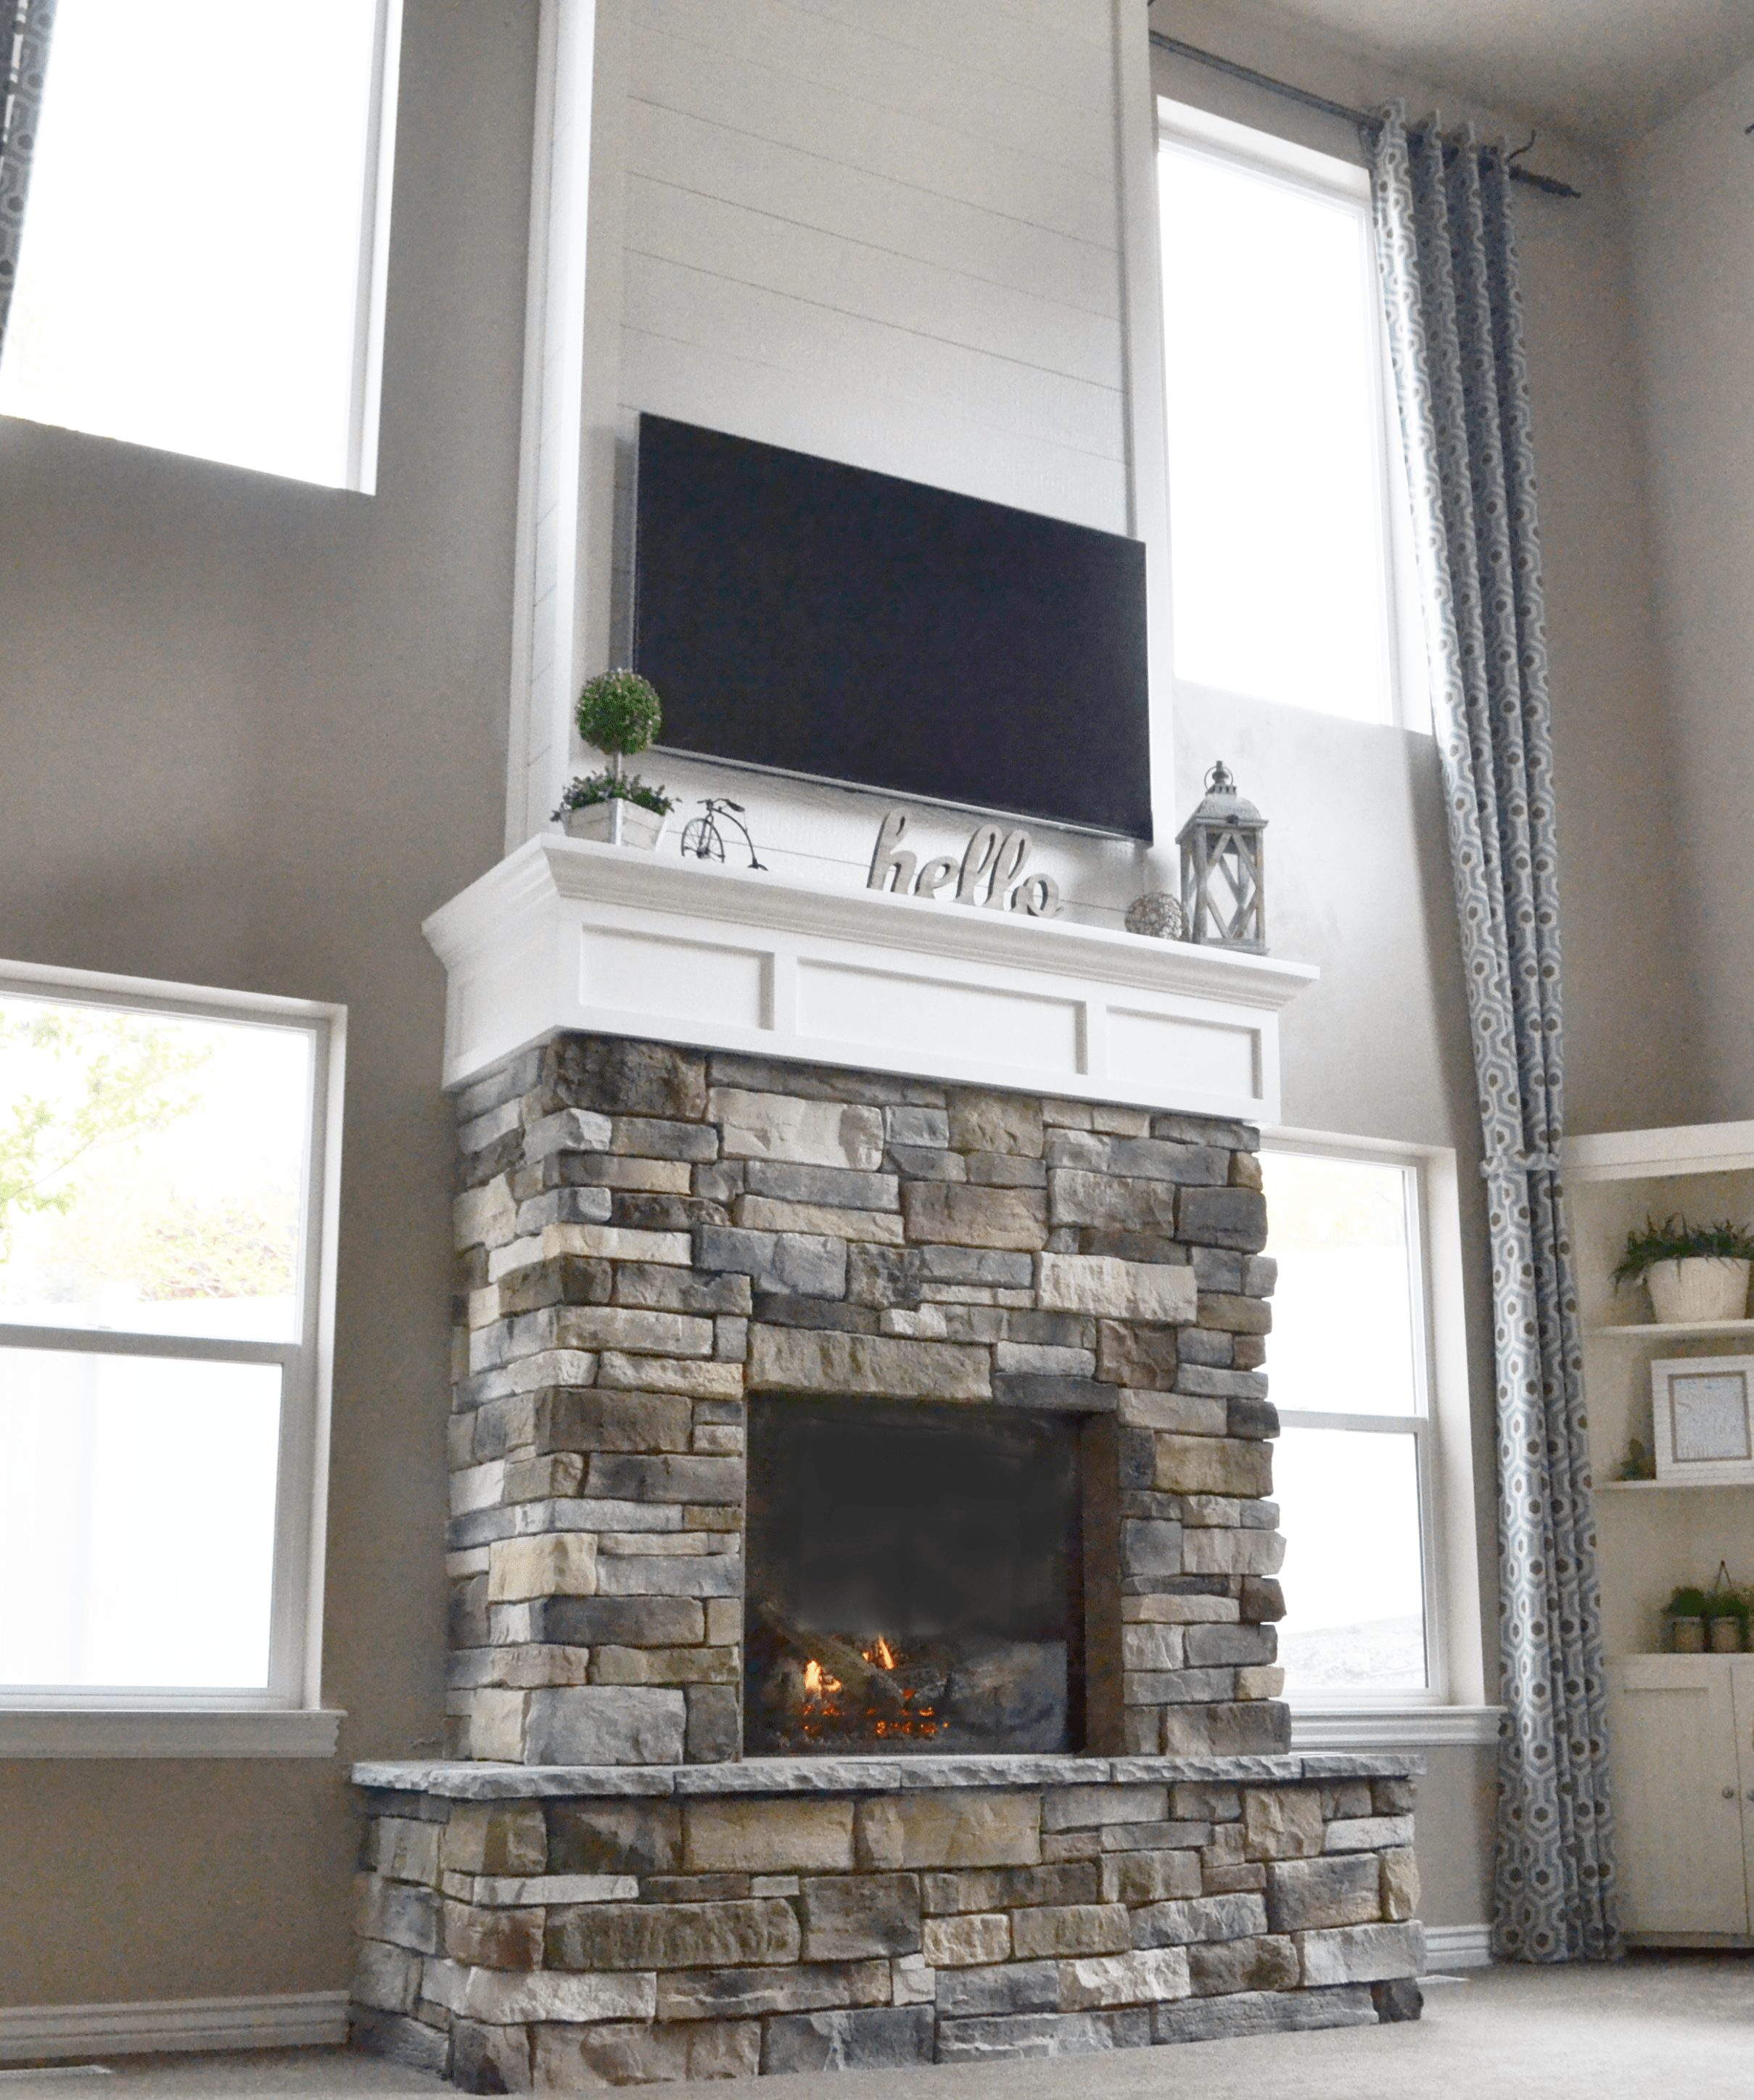 How Do You Clean Fireplace Brick Fresh Diy Fireplace with Stone & Shiplap